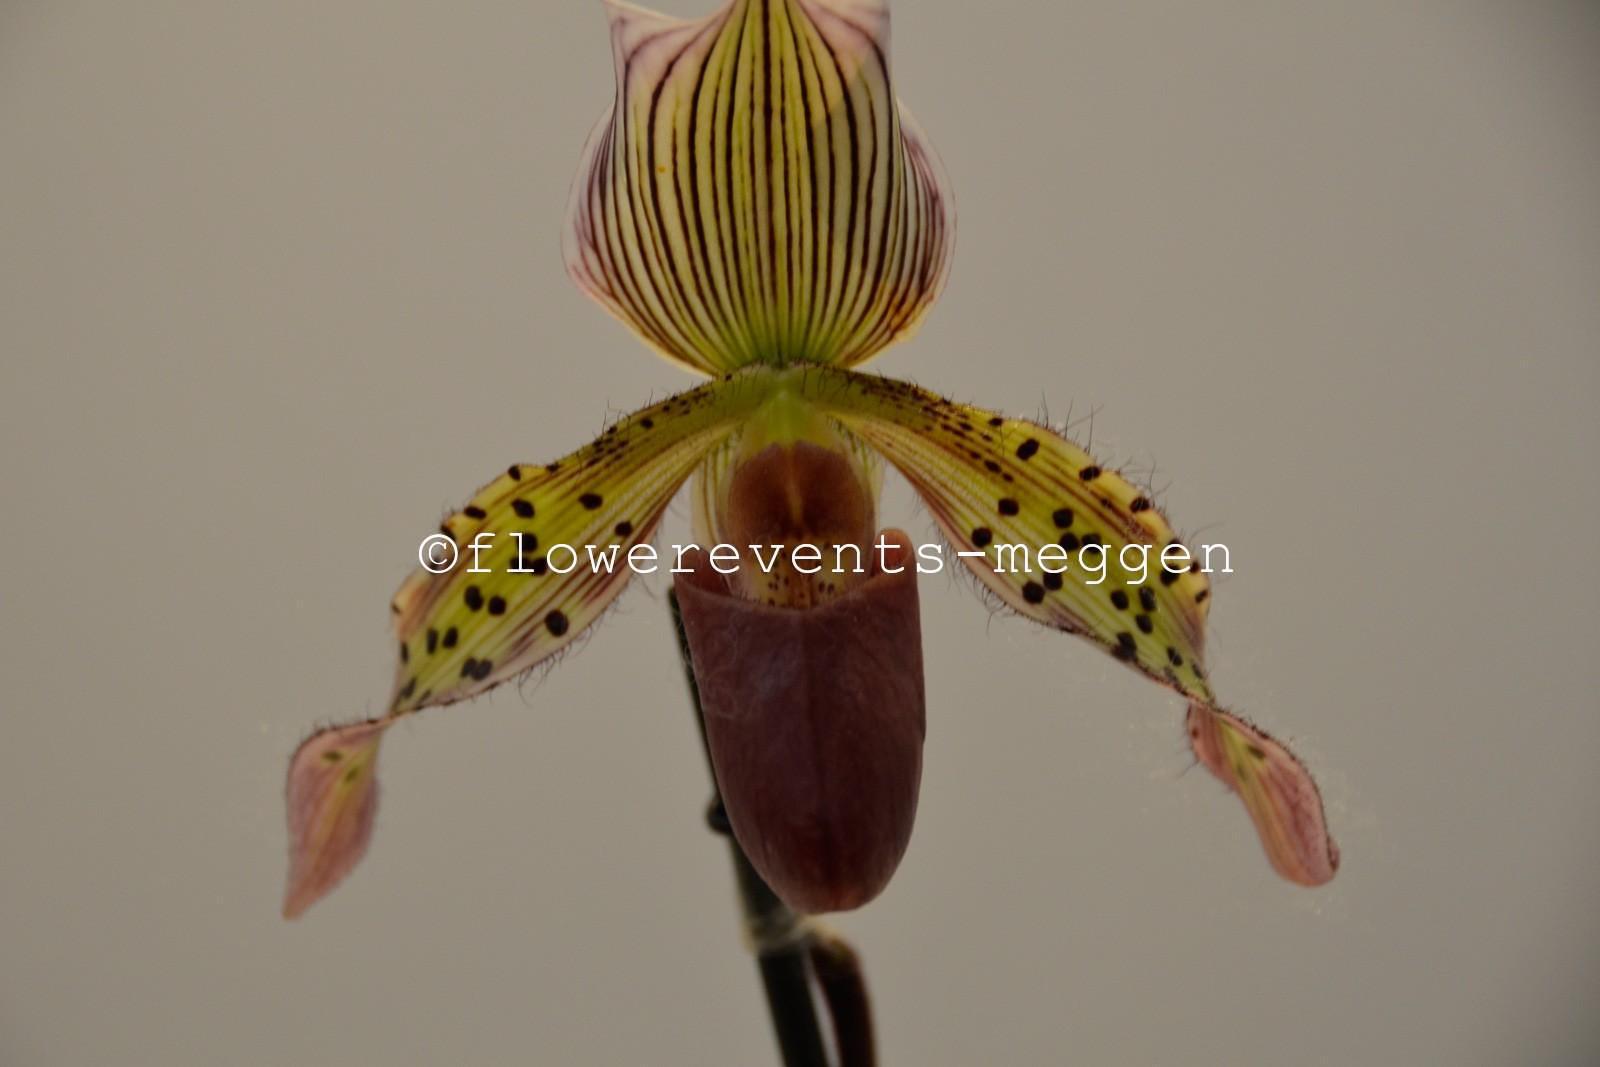 Lady Slipper orchid